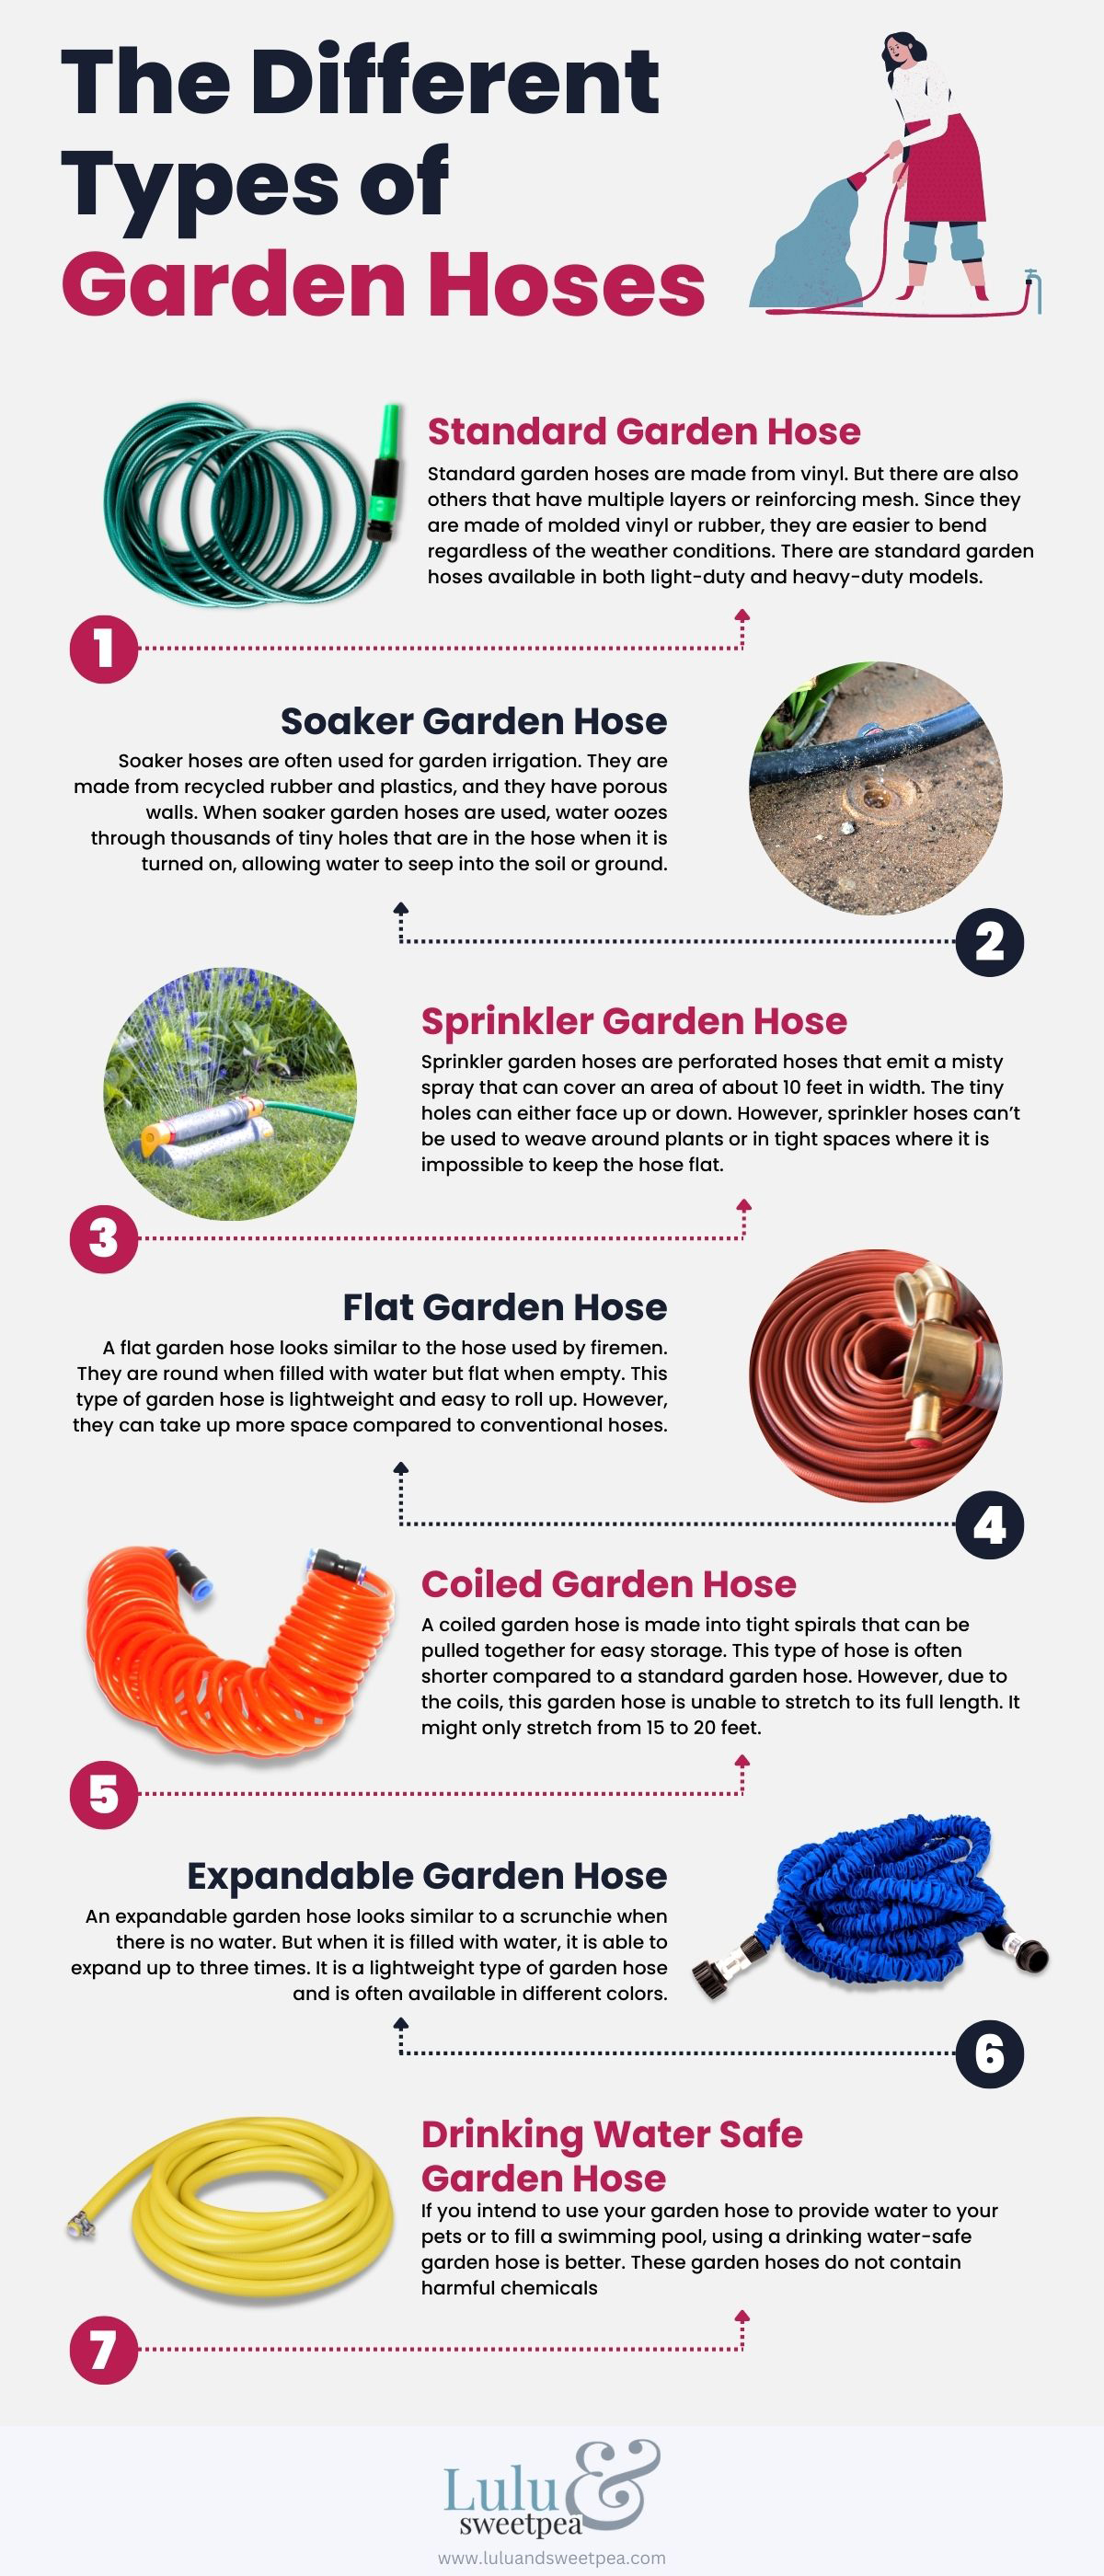 The Different Types of Garden Hoses